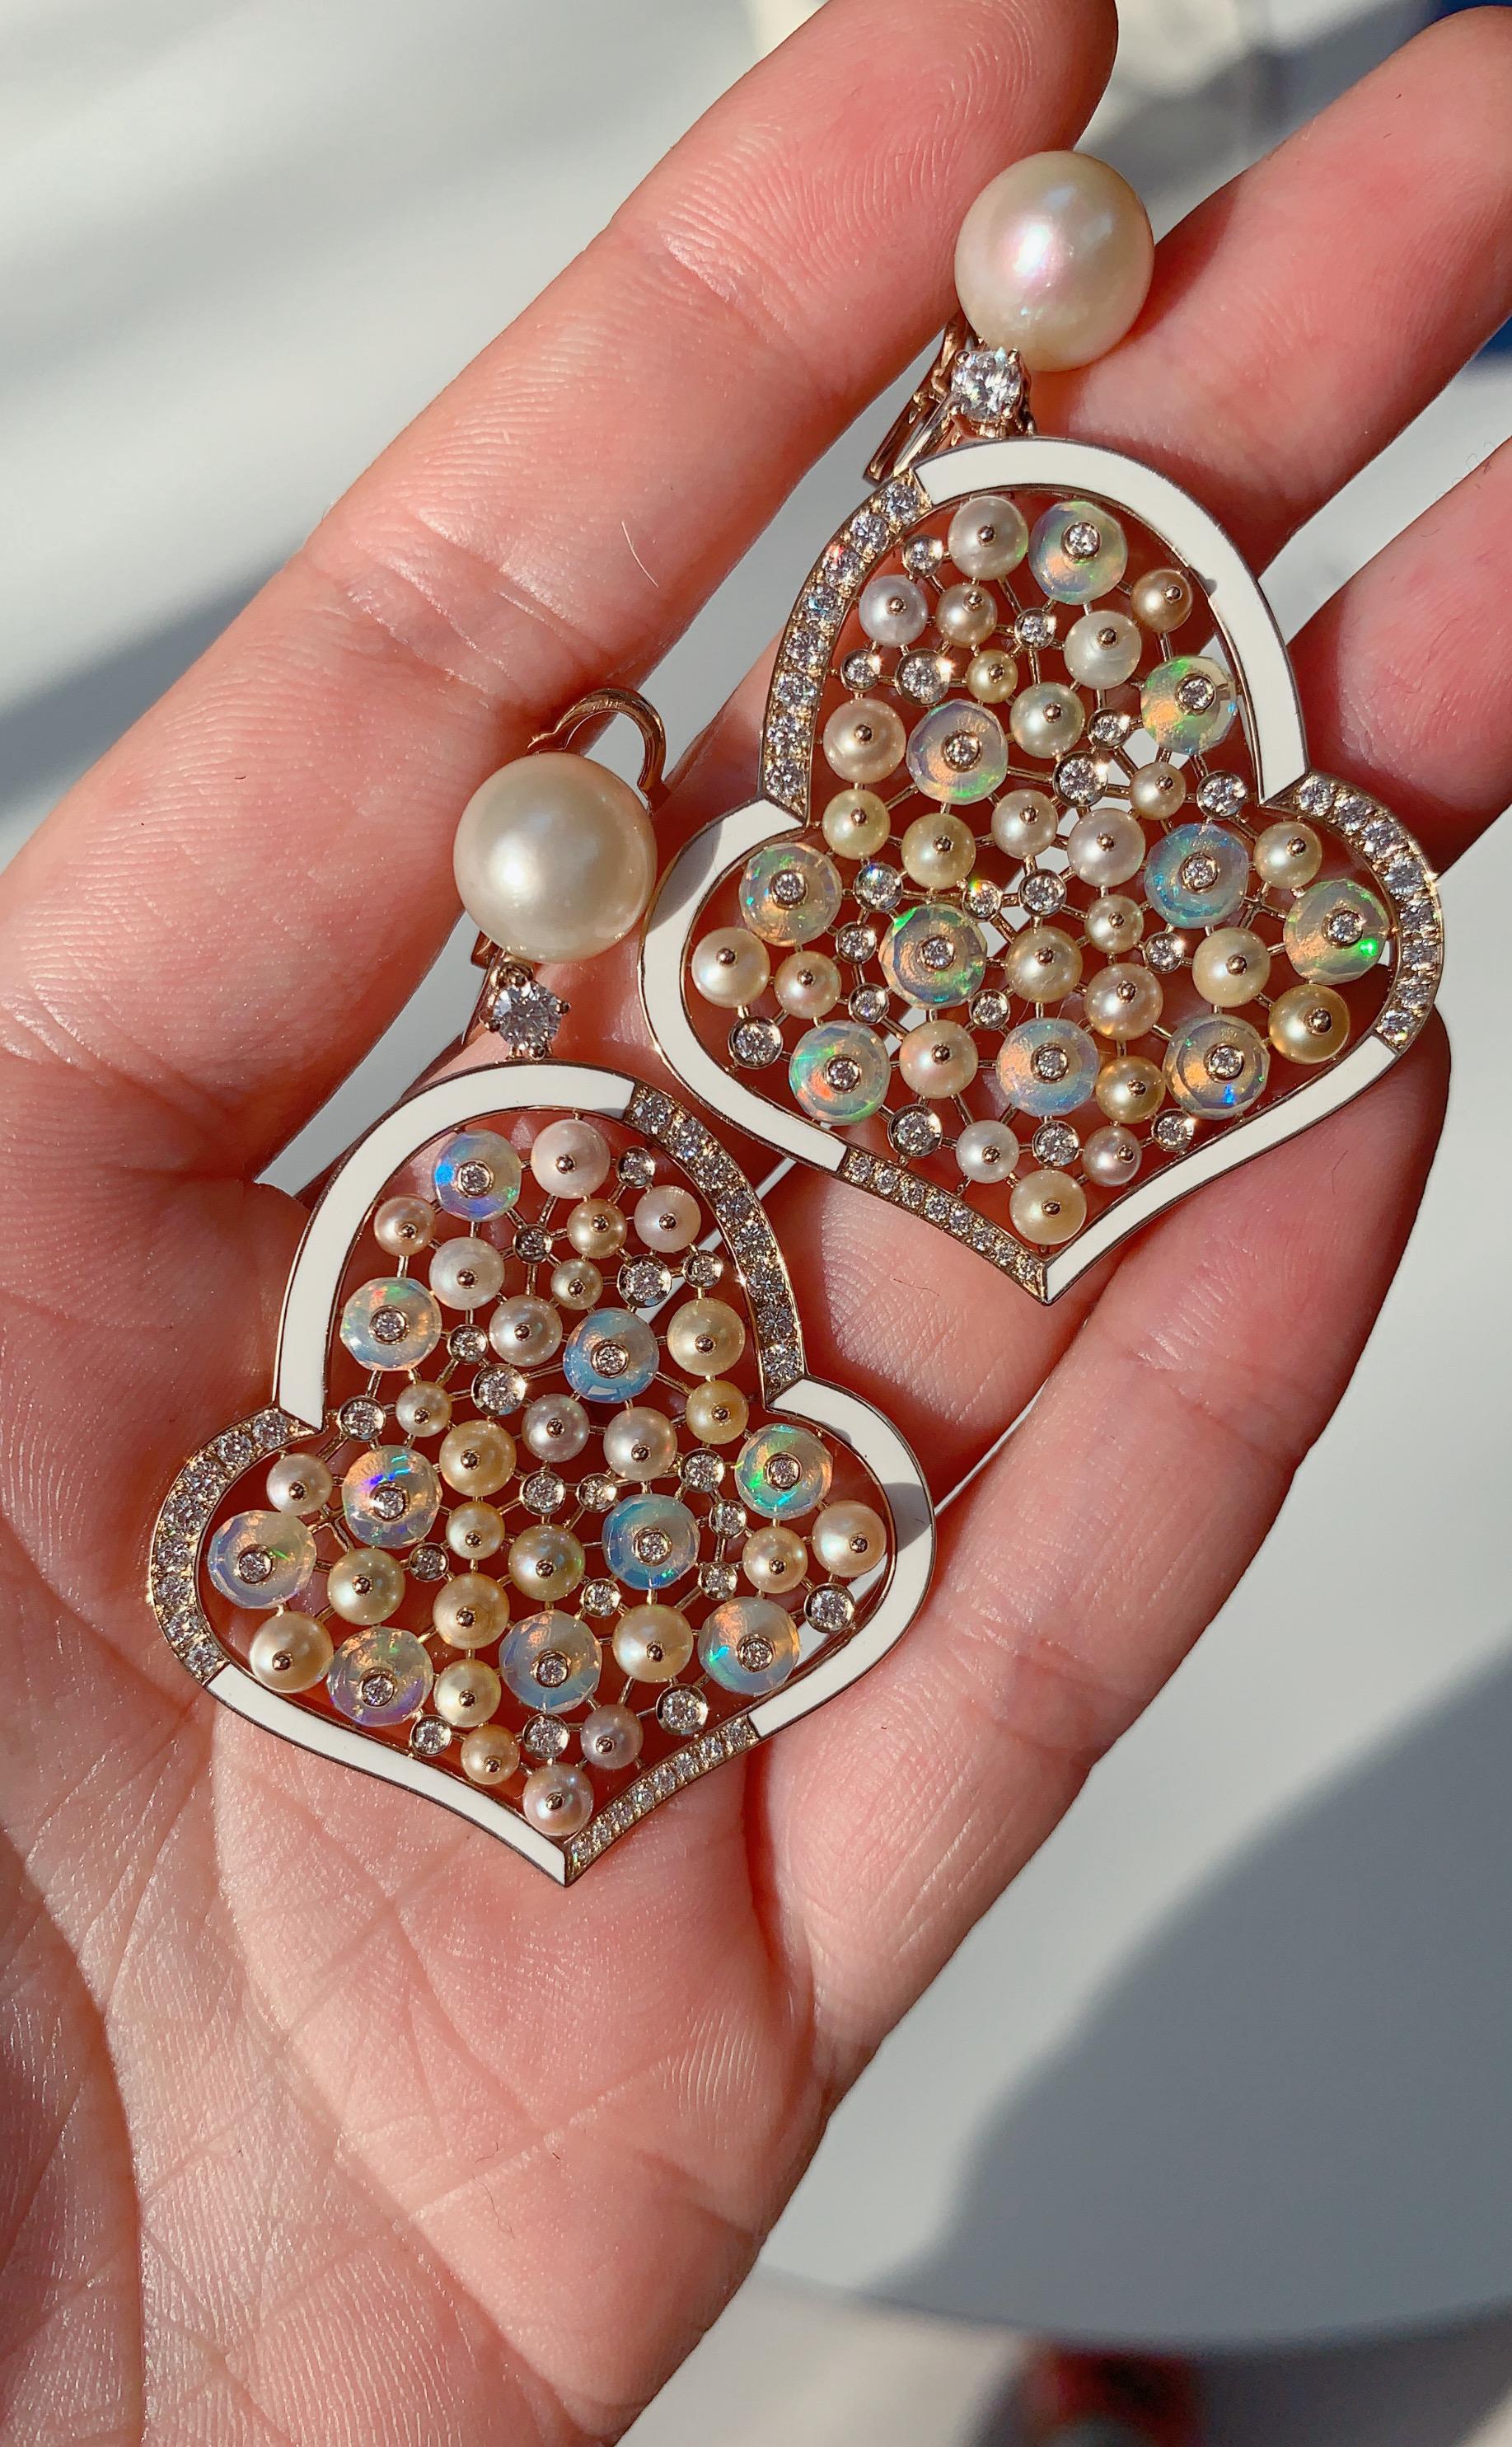 A Pair of Natural Pearl, Opal, Diamond and Enamel Gold Earrings as part of the Selene Suite by Jewelry Designer, Sarah Ho.

The Selene pieces capture the luminescent beauty of the natural pearls - these pearls range in color from apricot to lavender